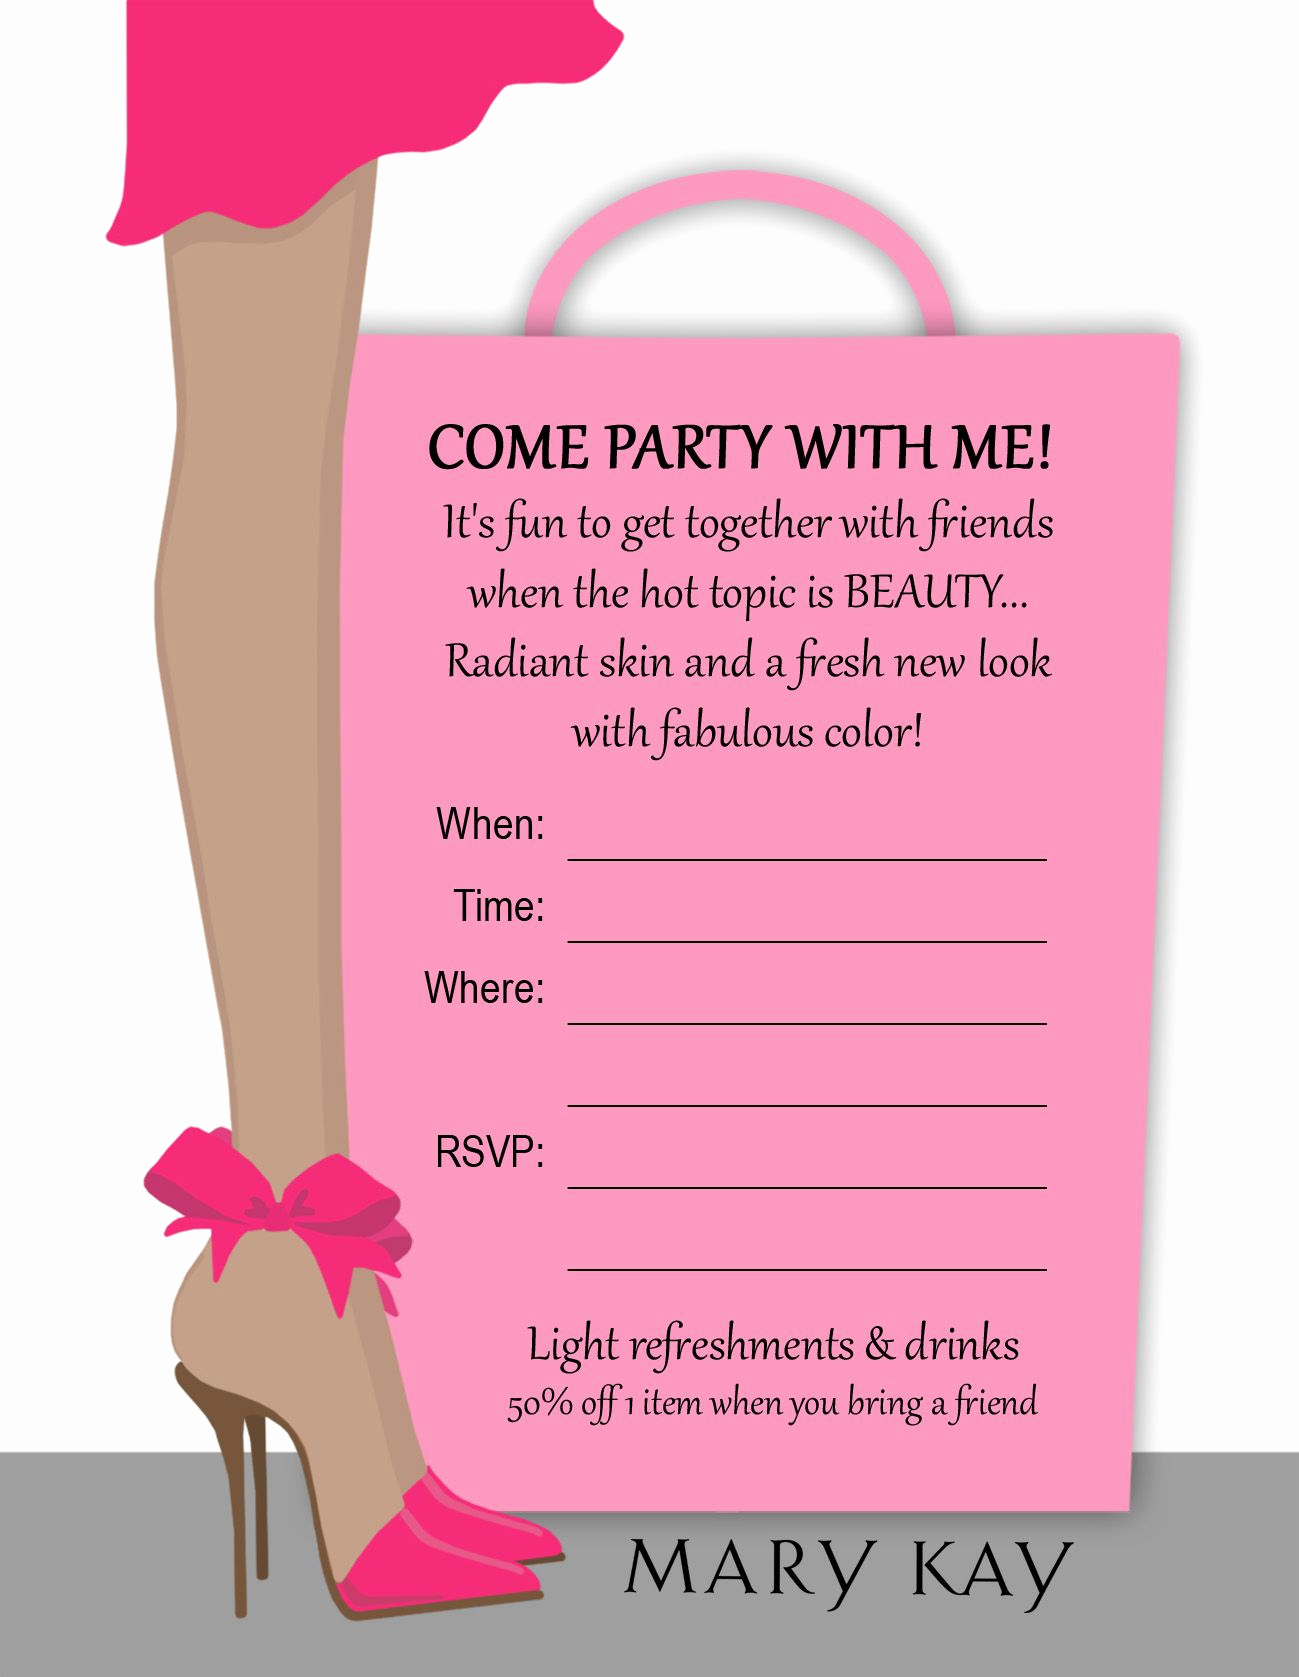 Mary Kay Debut Party Invitation Best Of Printable Mary Kay Invitations Google Search